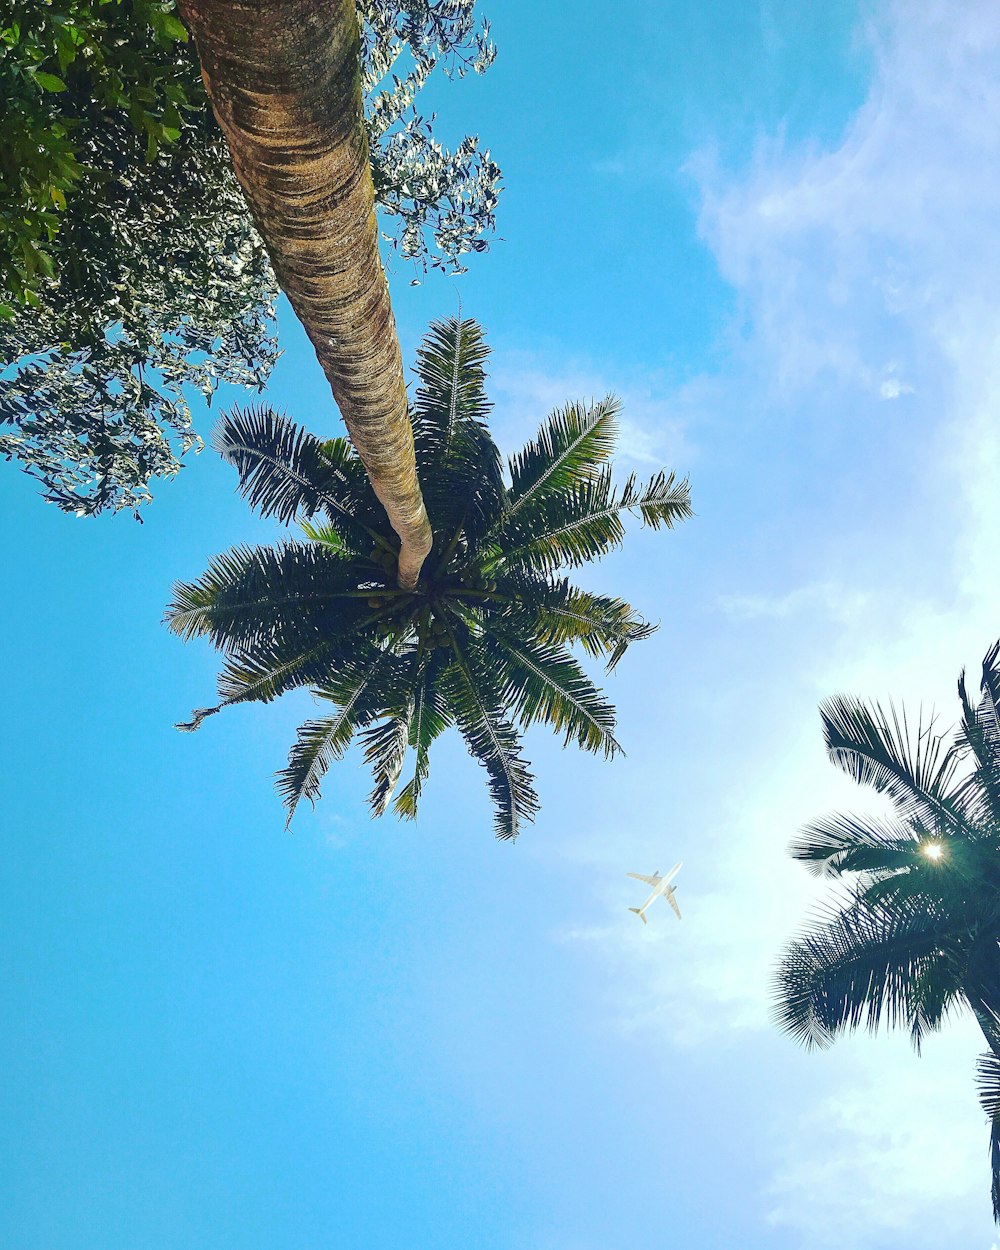 worm eye view of a coconut tree